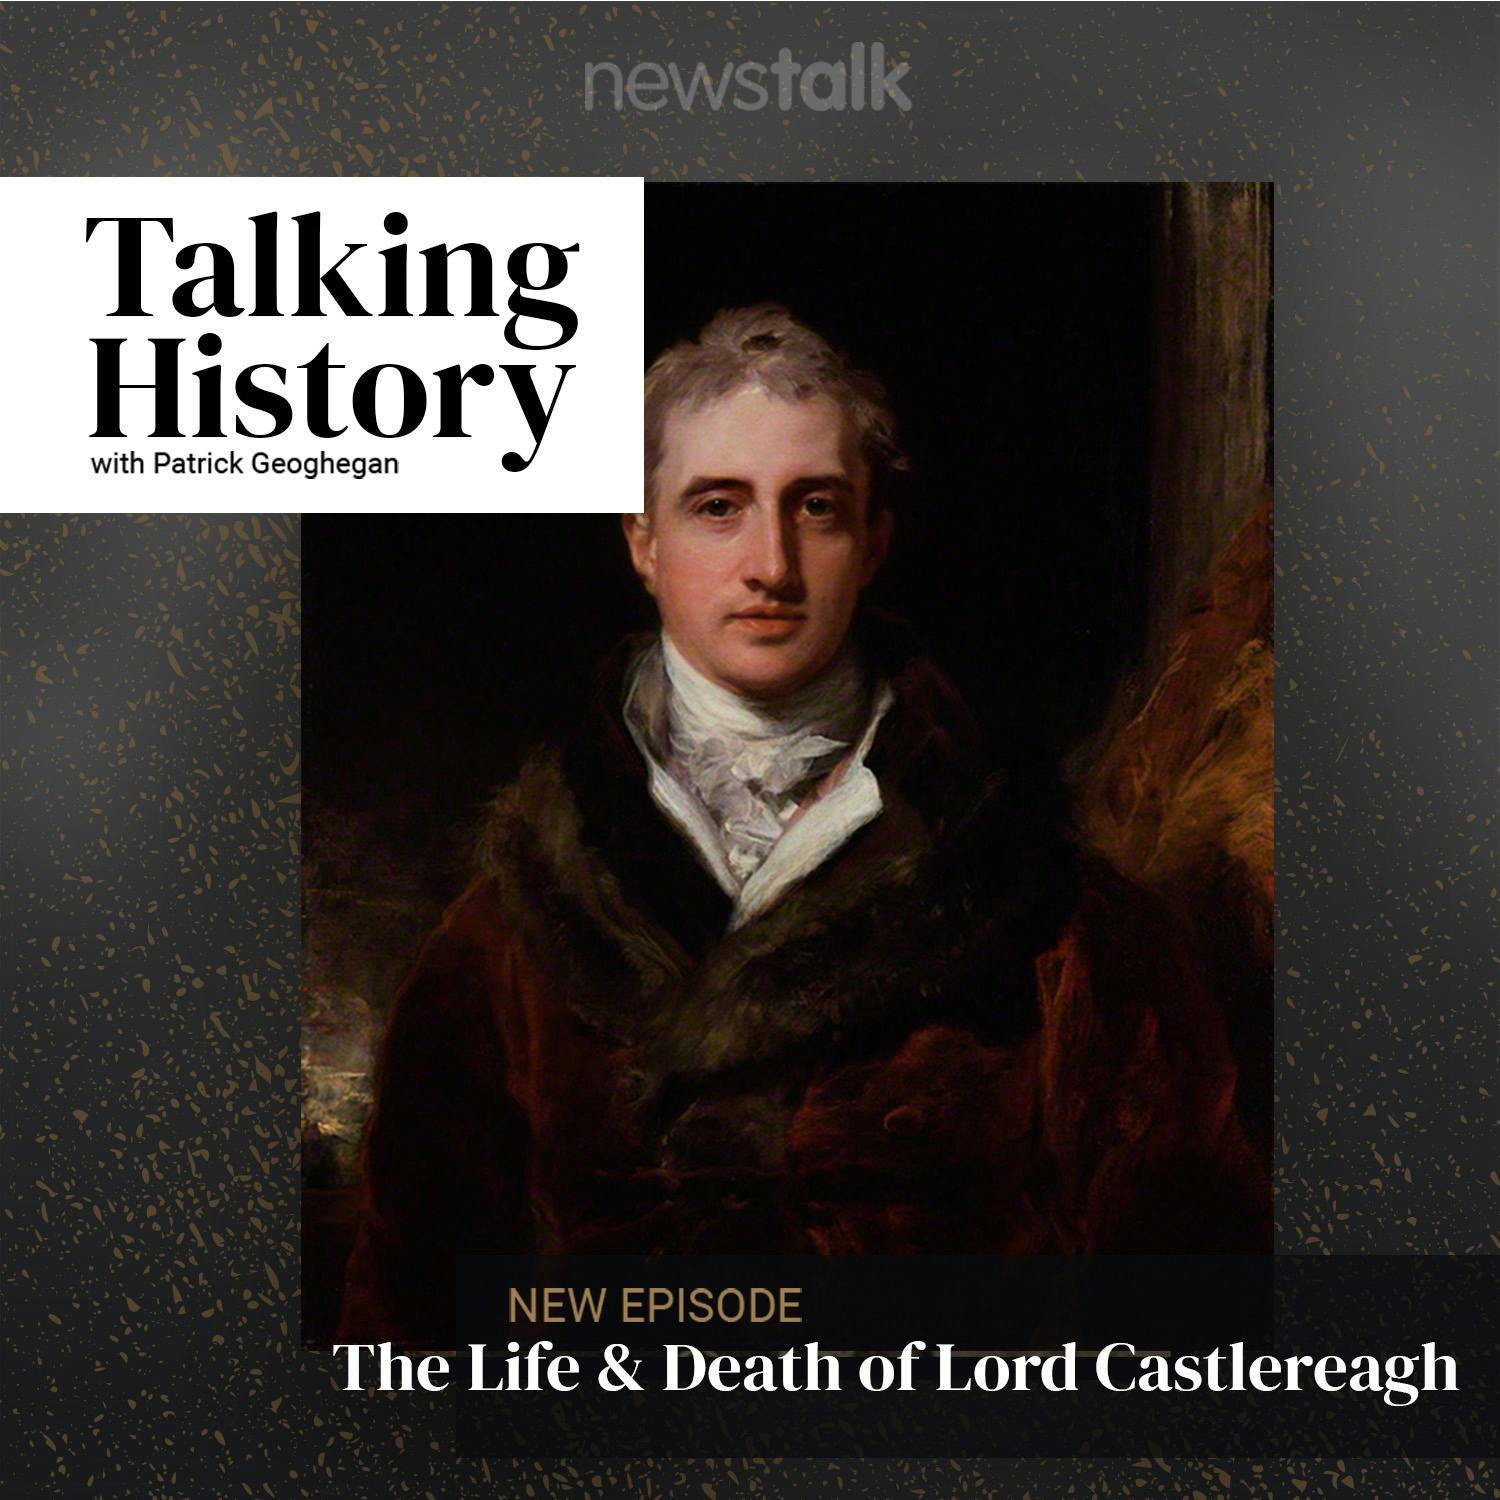 The Life & Death of Lord Castlereagh